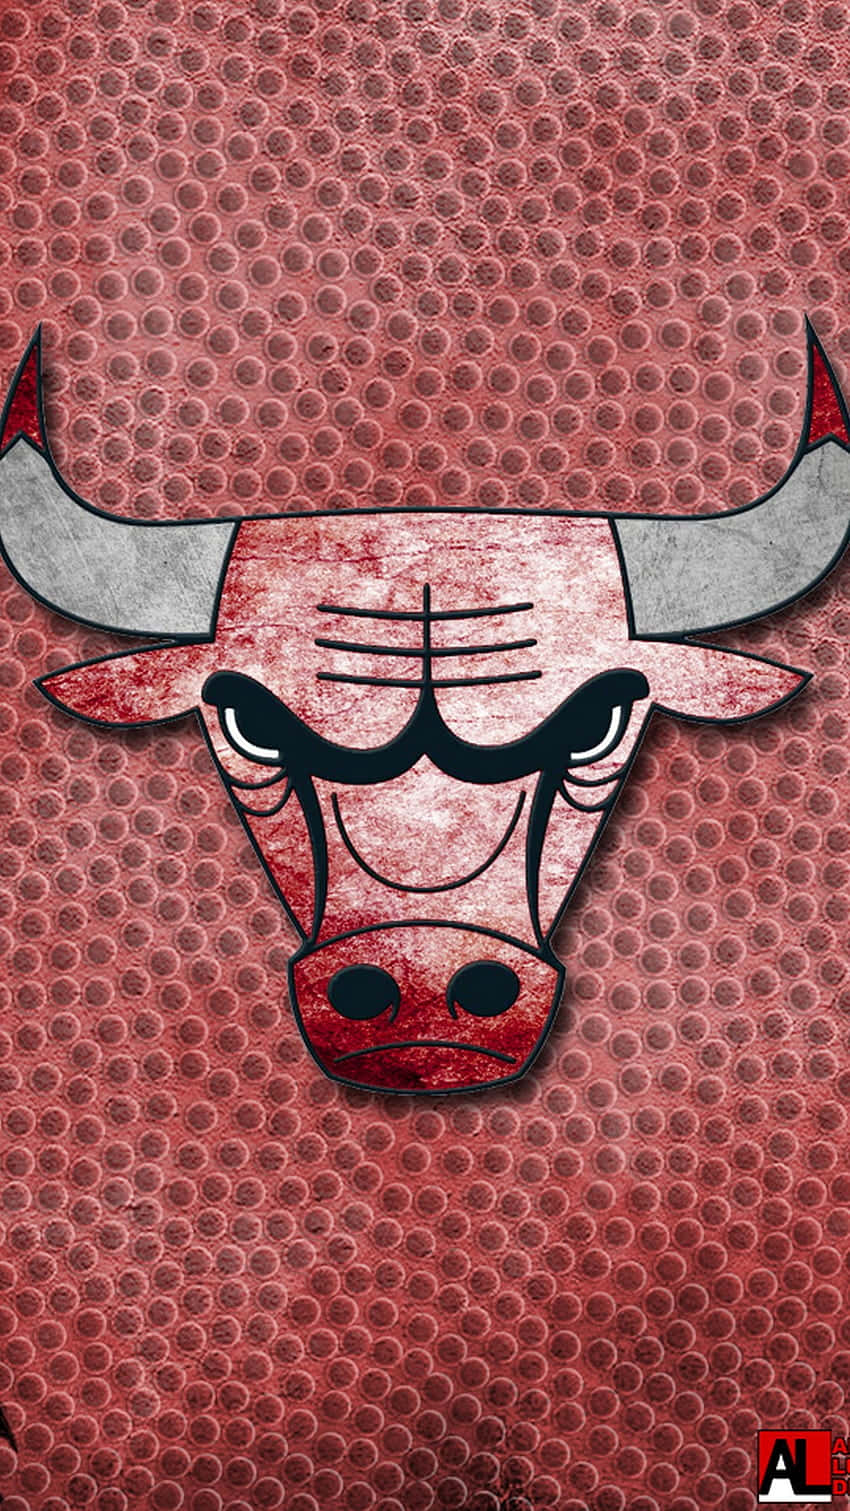 Get Ready To Cheer On Your Favorite Team – Chicago Bulls! Background